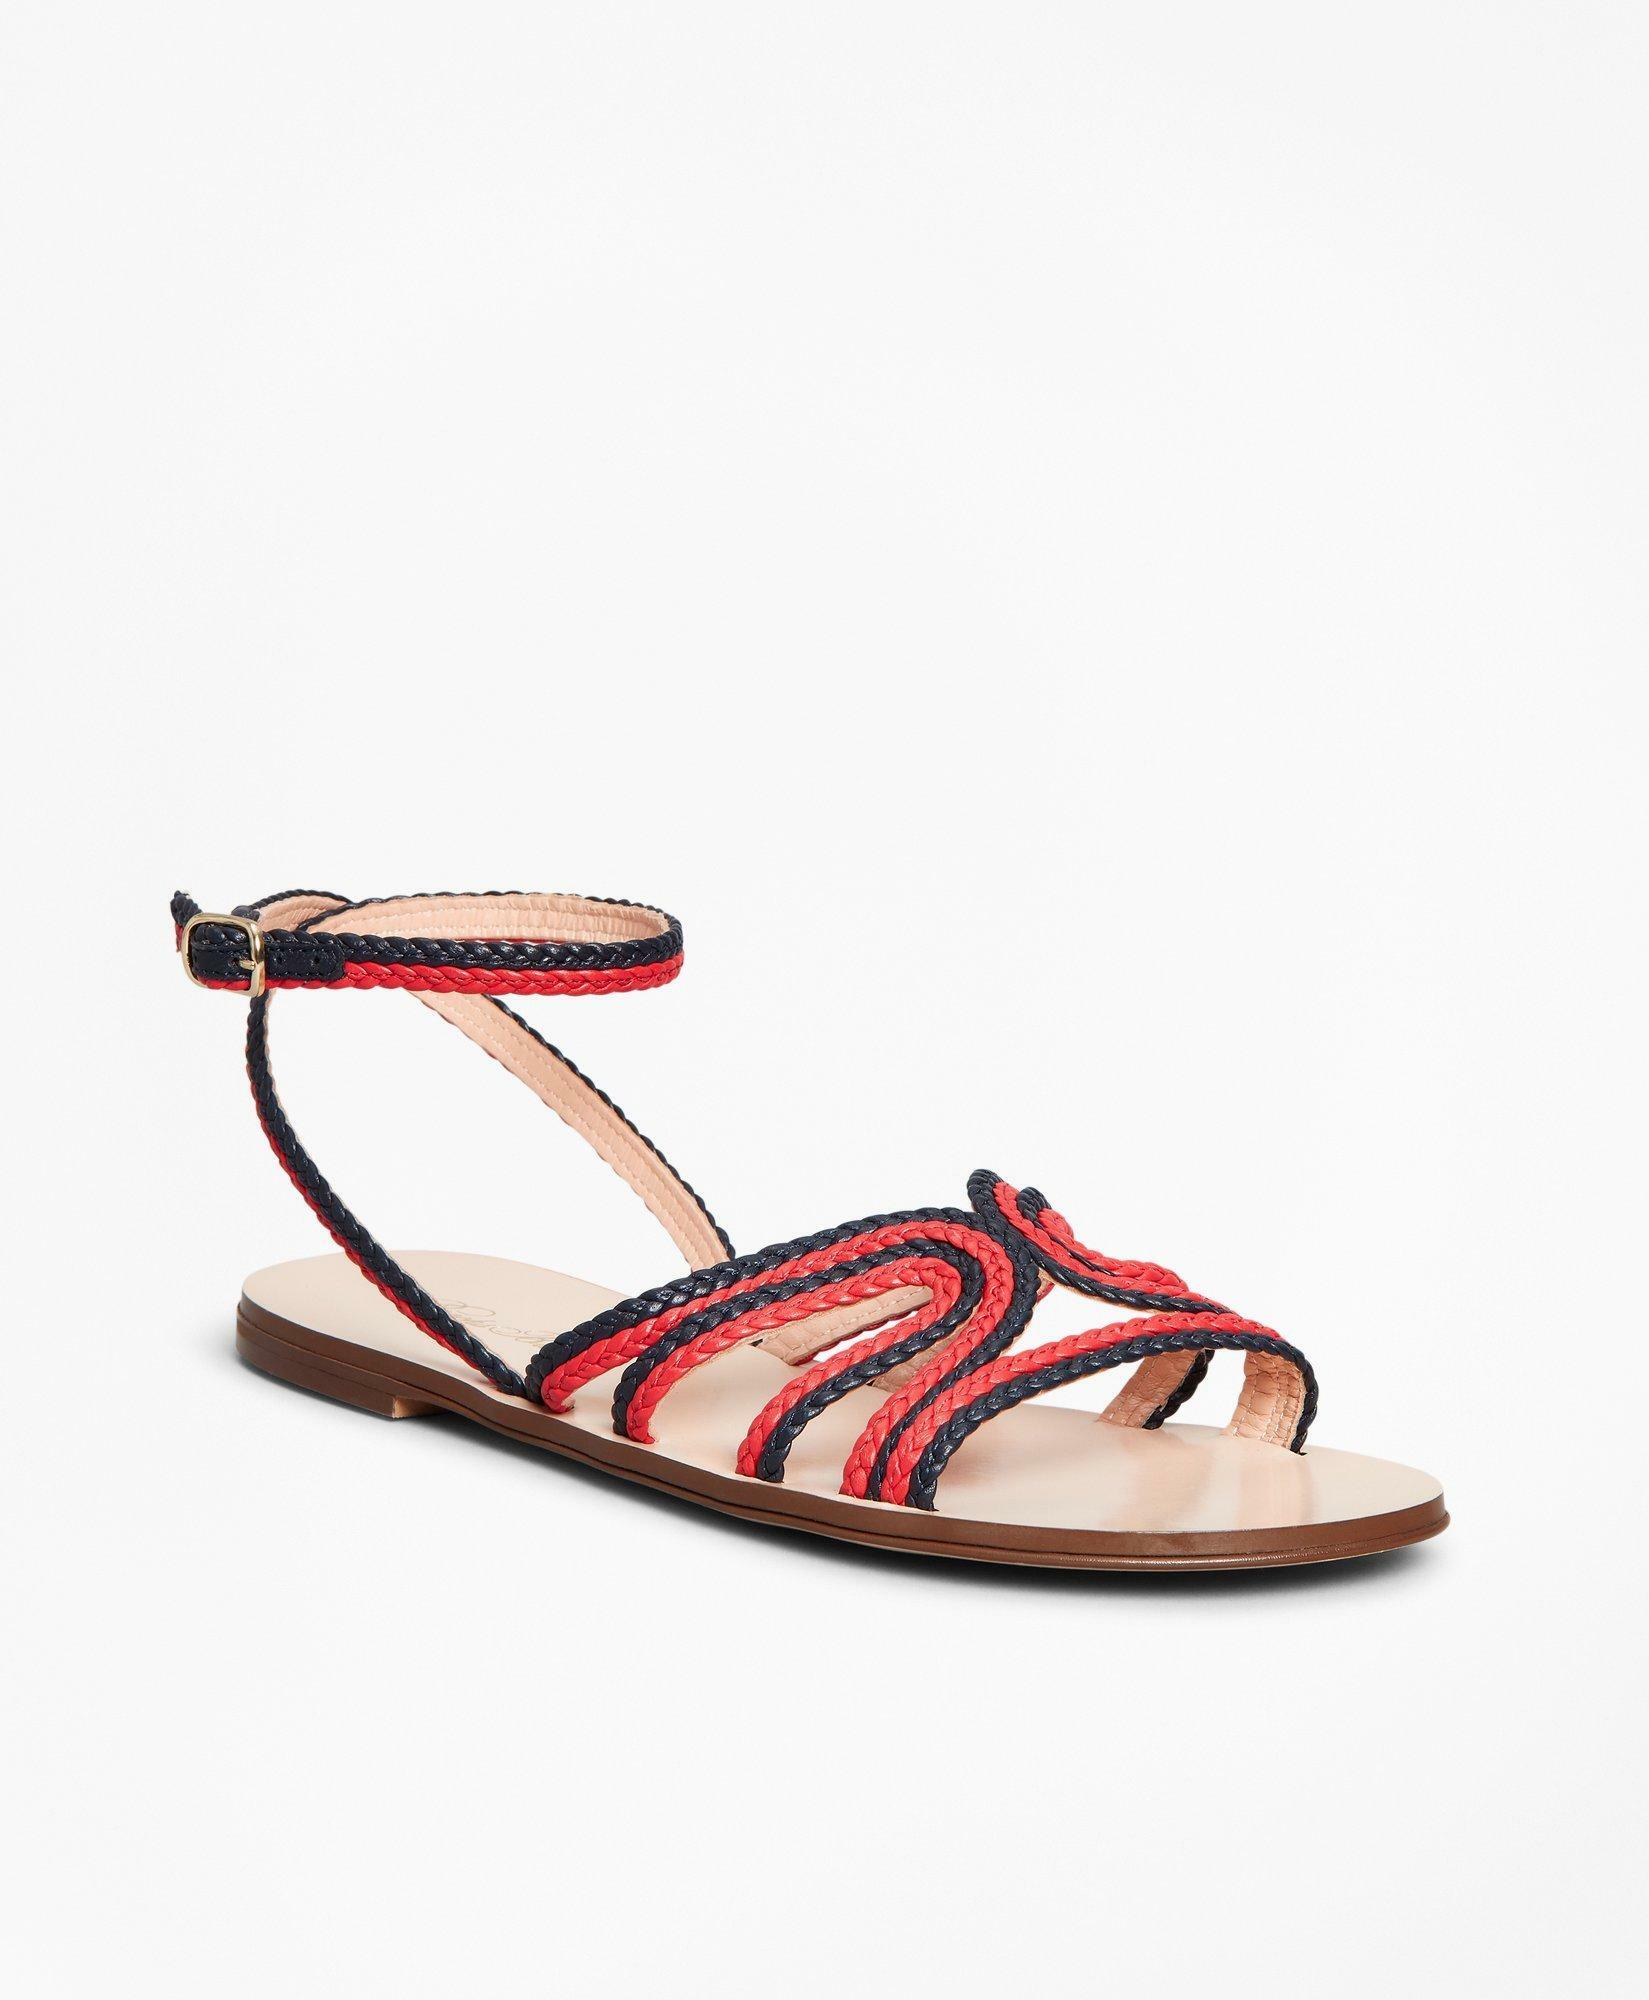 Brooks Brothers Women's Braided Leather Slide Sandals Shoes | Navy